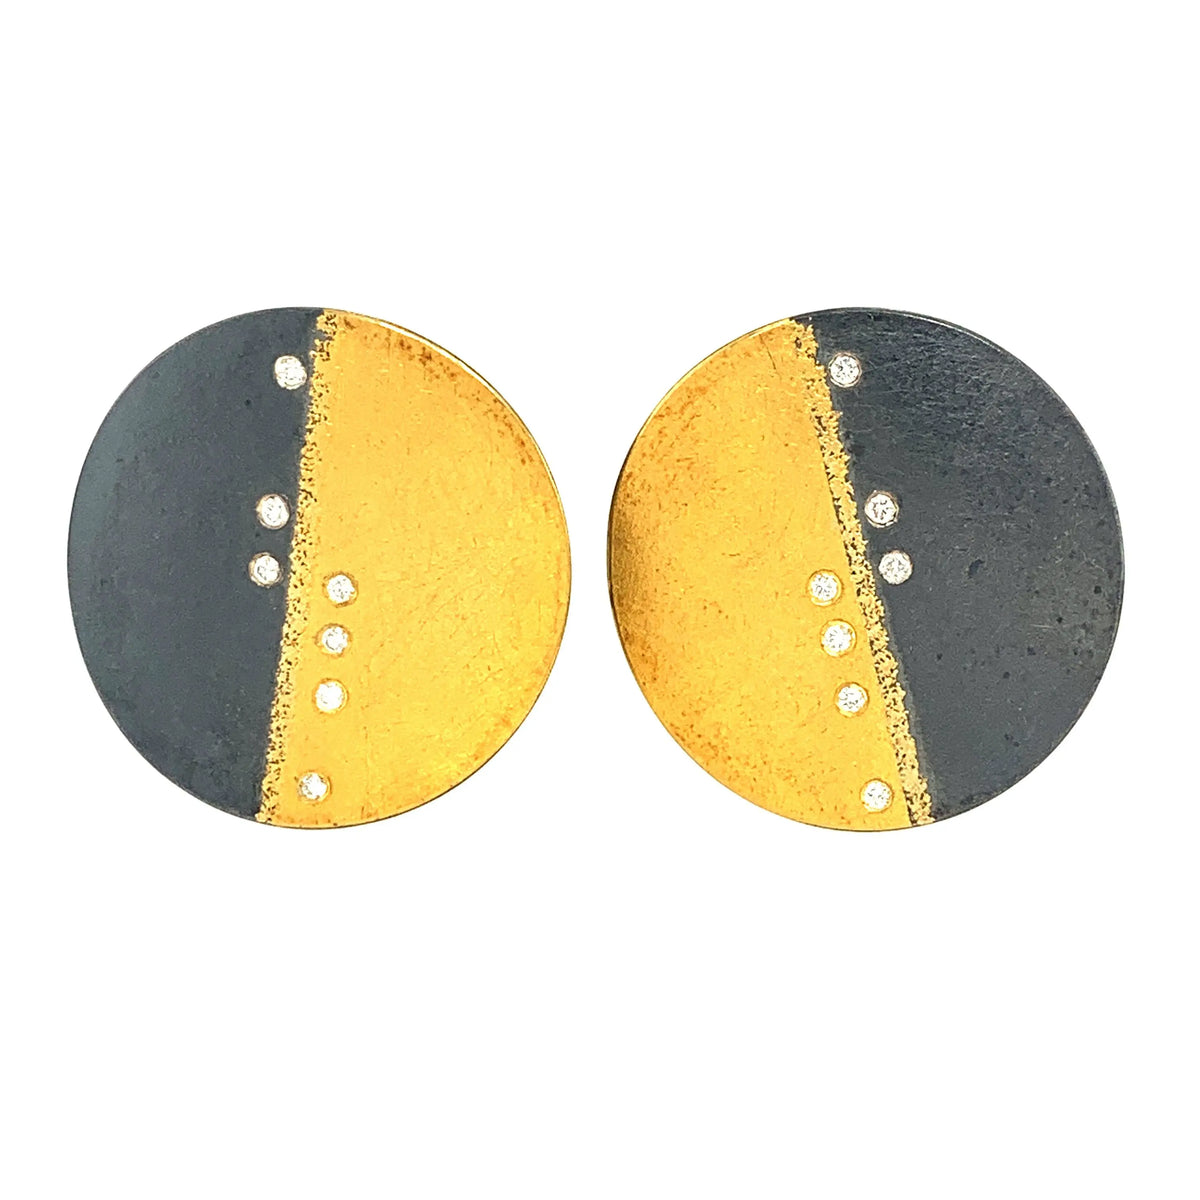 One of Kind Earrings  Large Disc Earrings in Oxidized Sterling Silver and 24k gold, .14tcw VSI diamonds, 1 1/8&quot; diameter  Designed by Atelier Zobel Peter Schmidt